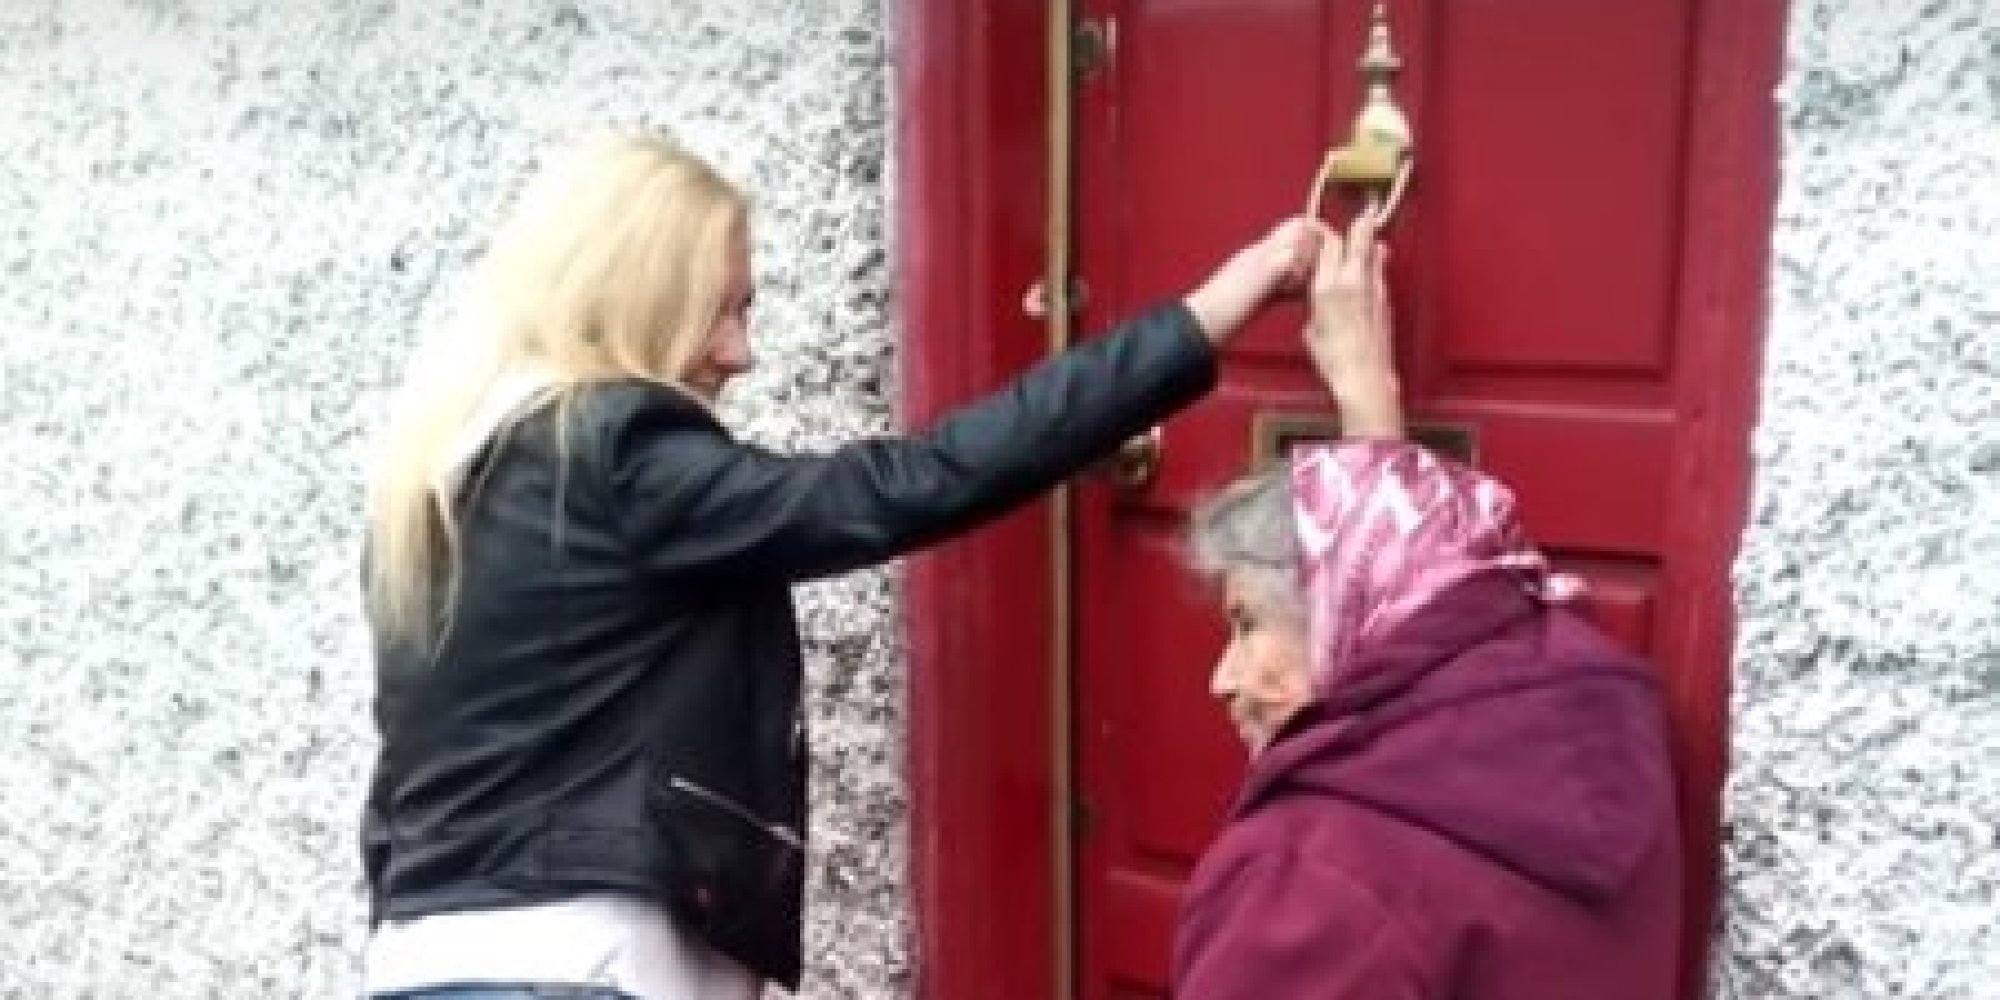 87 Year Old Granny Plays Knock A Door Run Fits Of Laughter Ensue